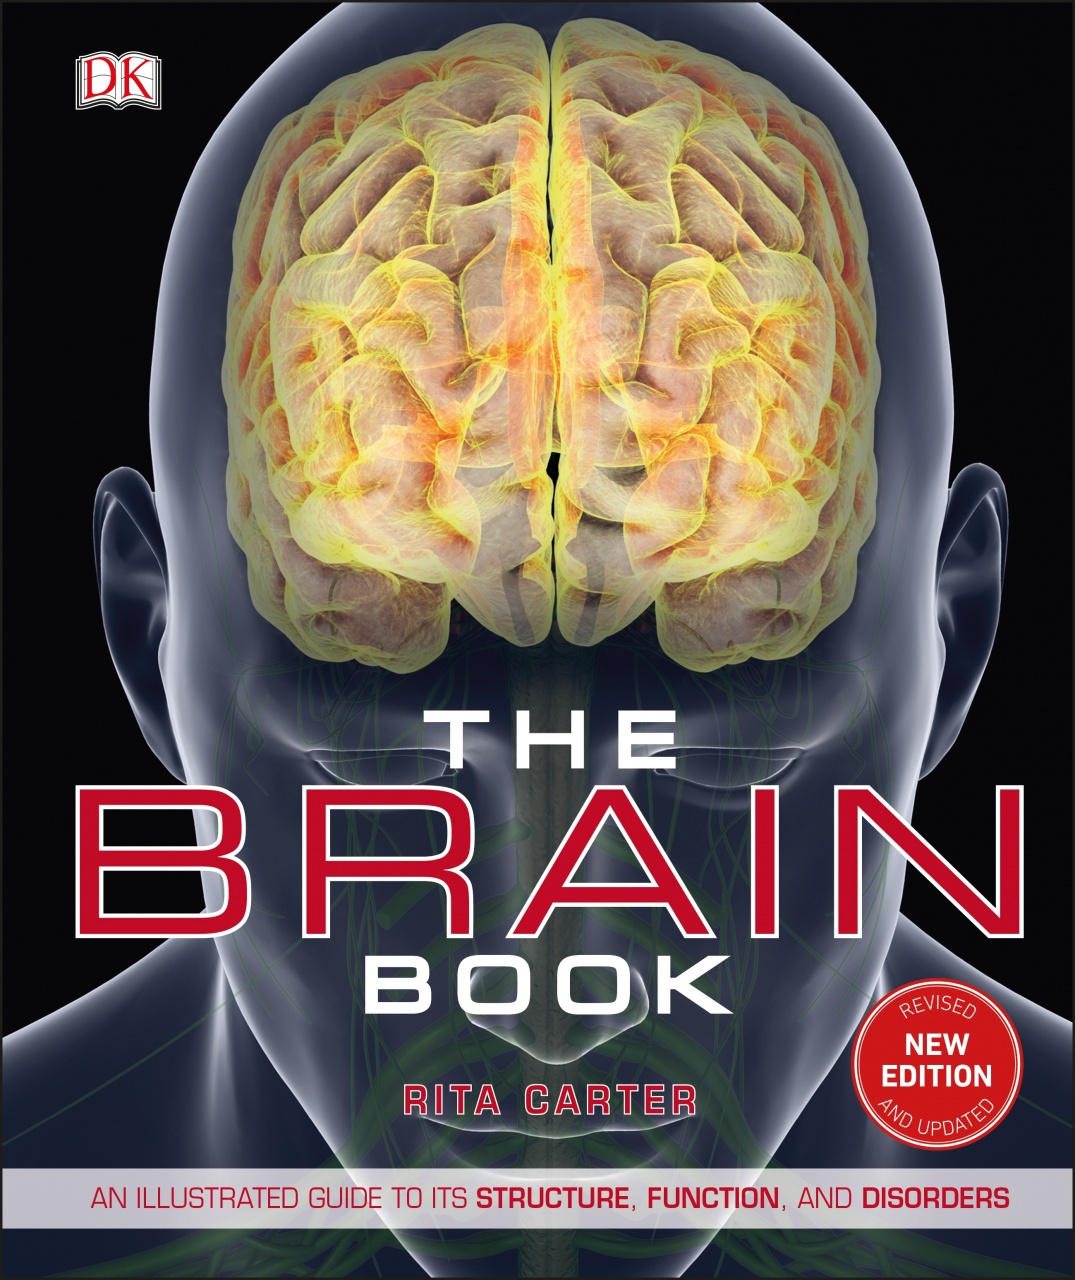 Complete Guide of the Human Brain - Structure, Function